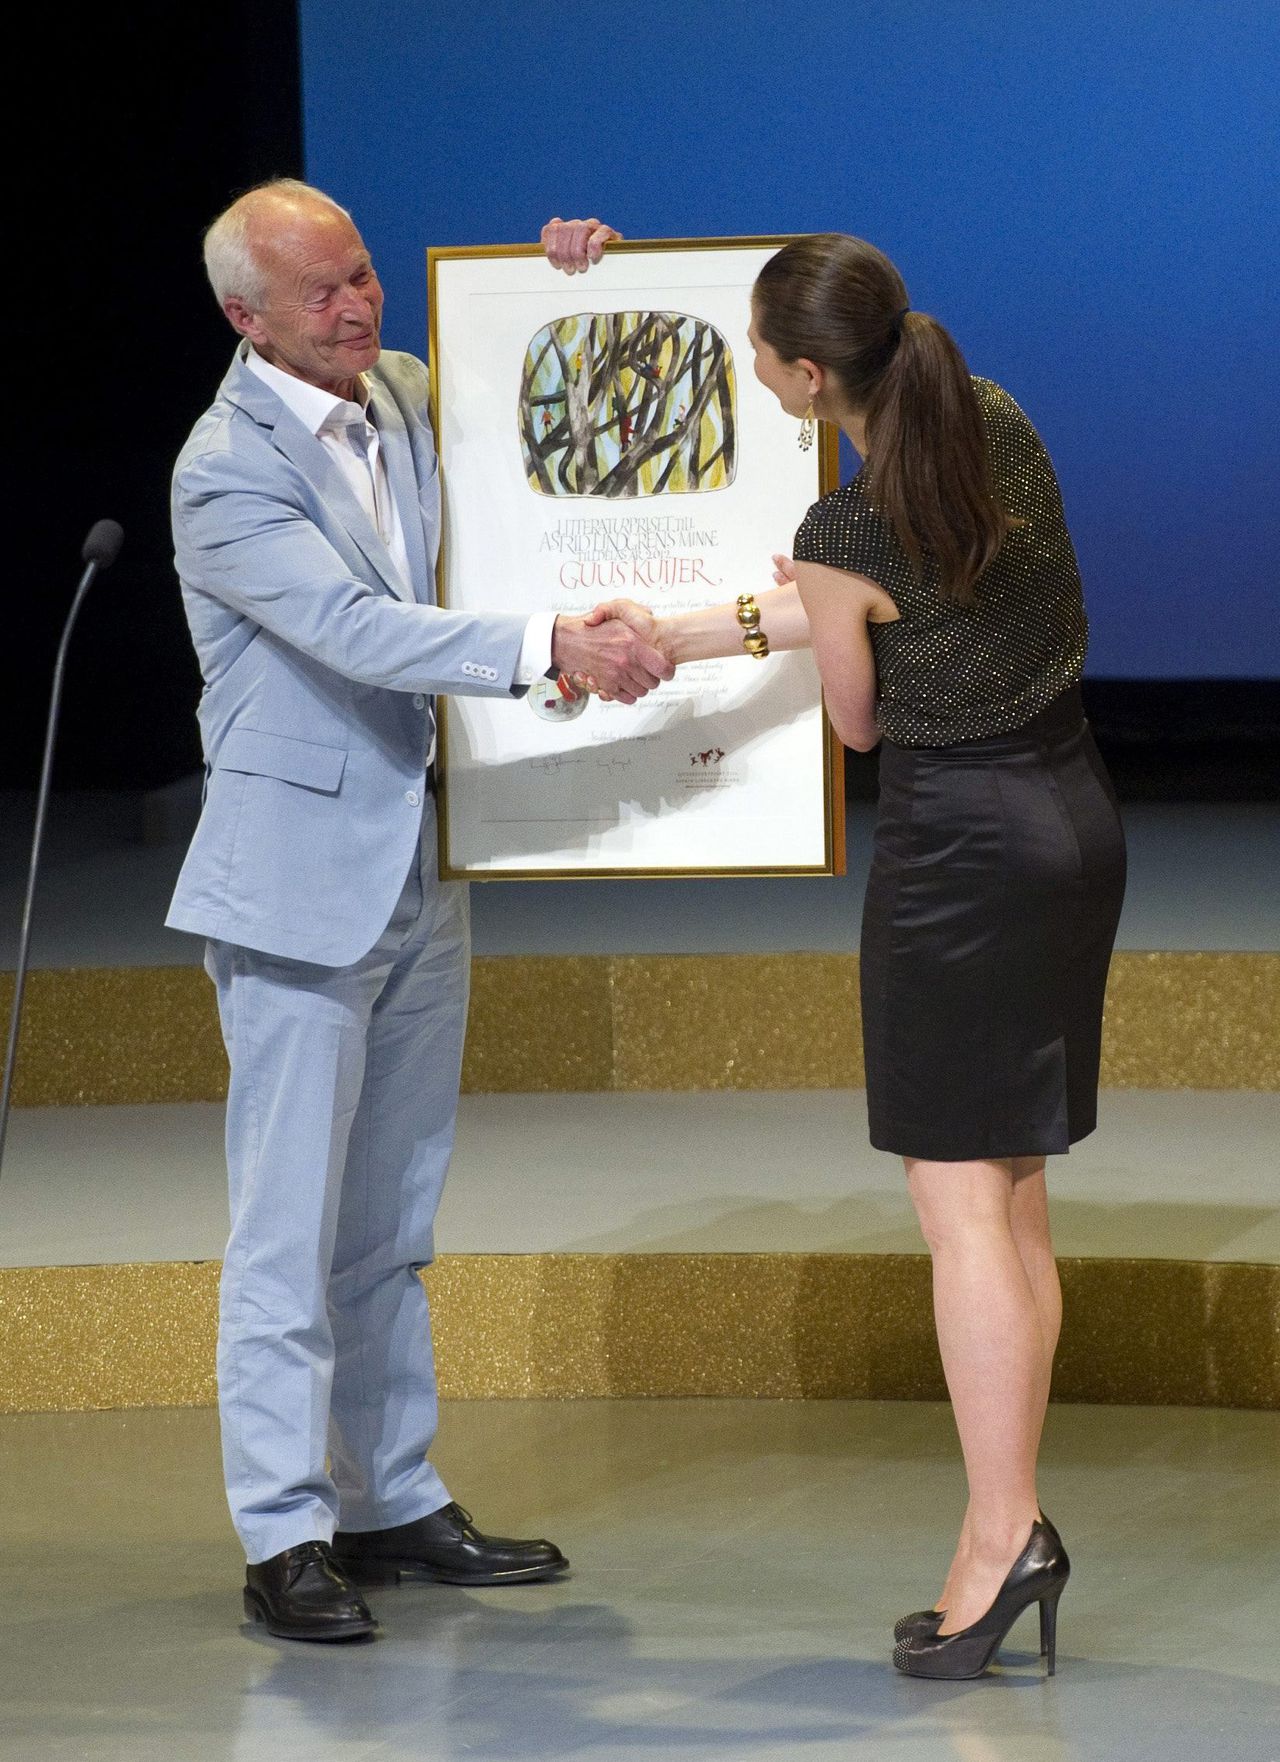 Dutch author Guus Kuijer (L) receives the 2012 ALMA Award (The Astrid Lindgren Memorial Award) from Swedish Crown Princess Victoria at the Concert Hall in Stockholm May 28, 2012. REUTERS/Scanpix Sweden/Leif R Jansson (SWEDEN - Tags: SOCIETY ROYALS) NO COMMERCIAL OR BOOK SALES. THIS IMAGE HAS BEEN SUPPLIED BY A THIRD PARTY. IT IS DISTRIBUTED, EXACTLY AS RECEIVED BY REUTERS, AS A SERVICE TO CLIENTS. SWEDEN OUT. NO COMMERCIAL OR EDITORIAL SALES IN SWEDEN